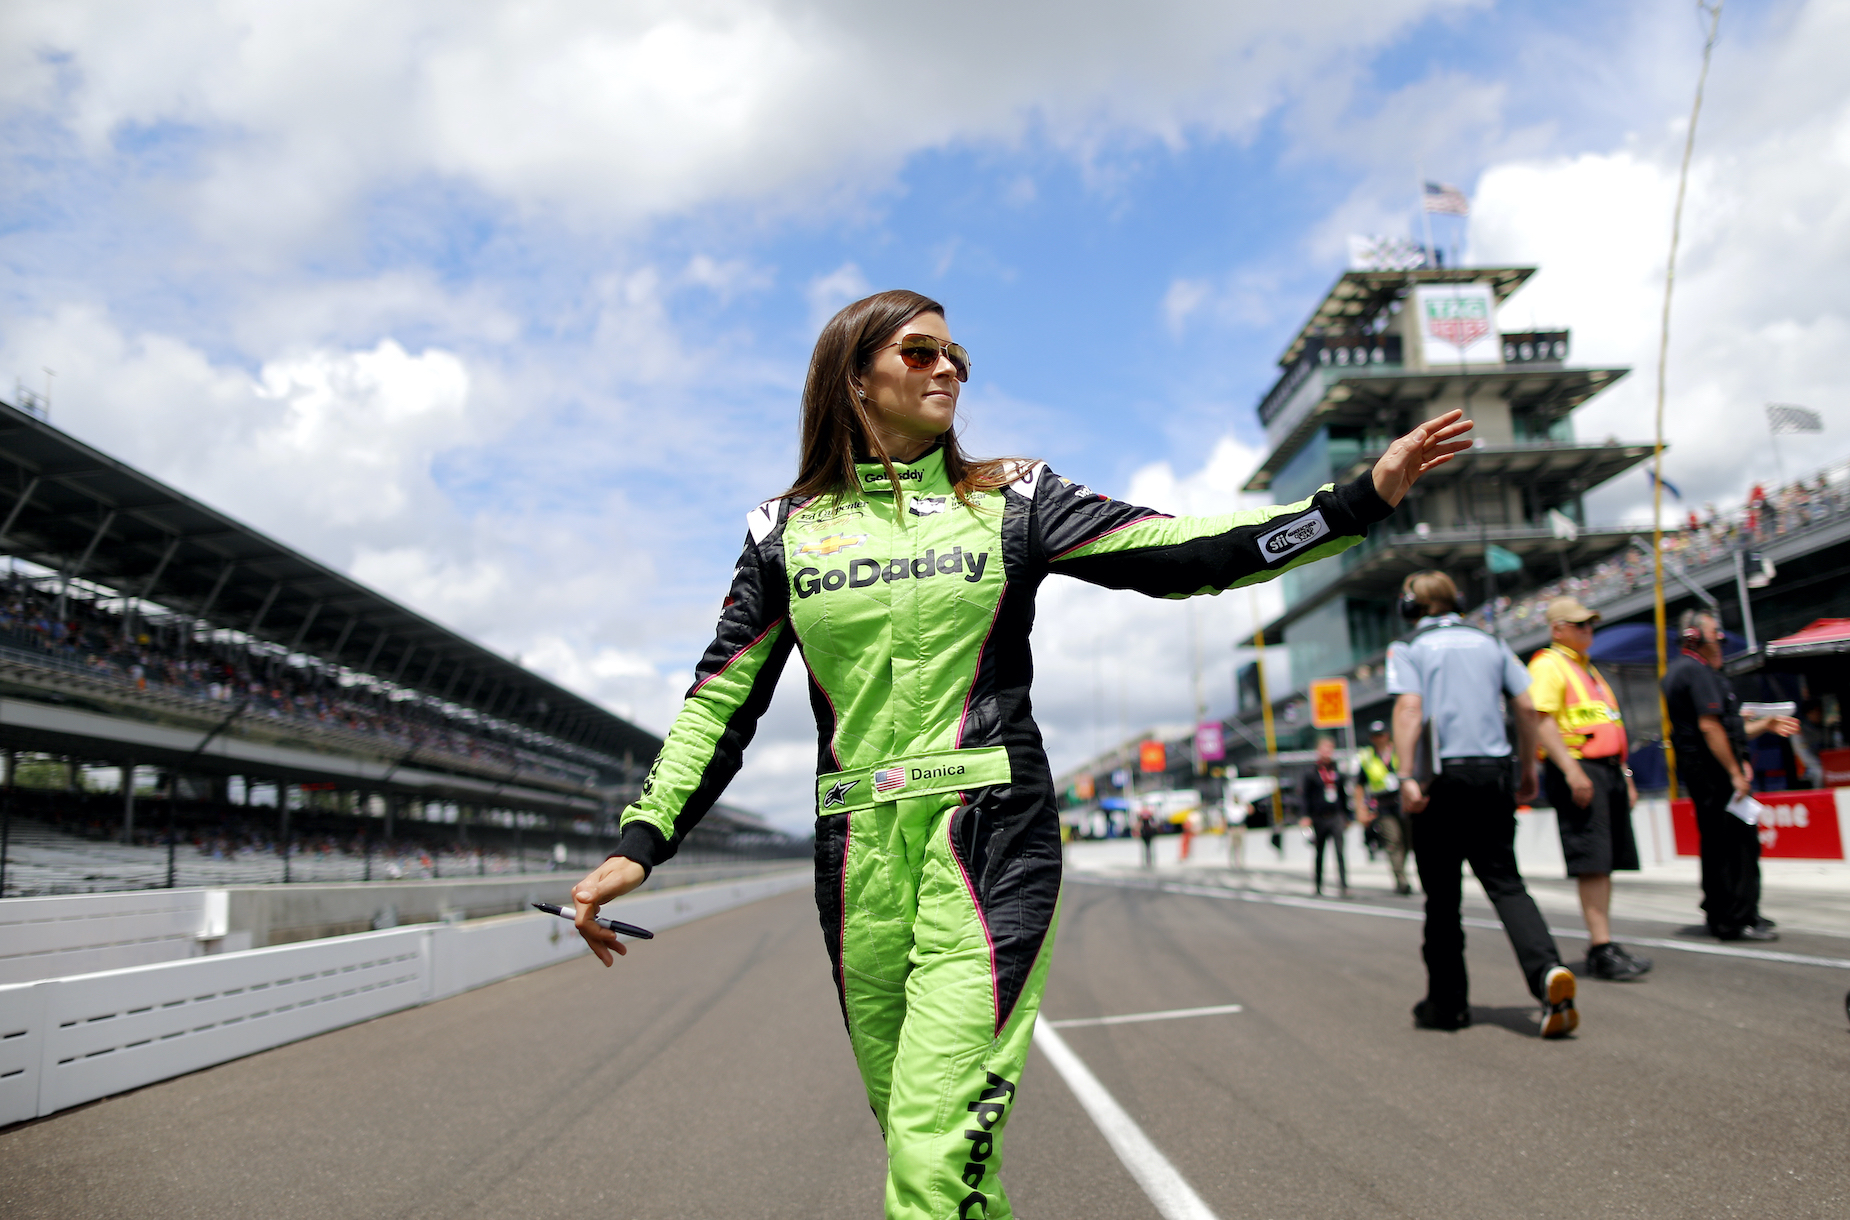 Danica Patrick at the Indianapolis Motor Speedway in 2018.